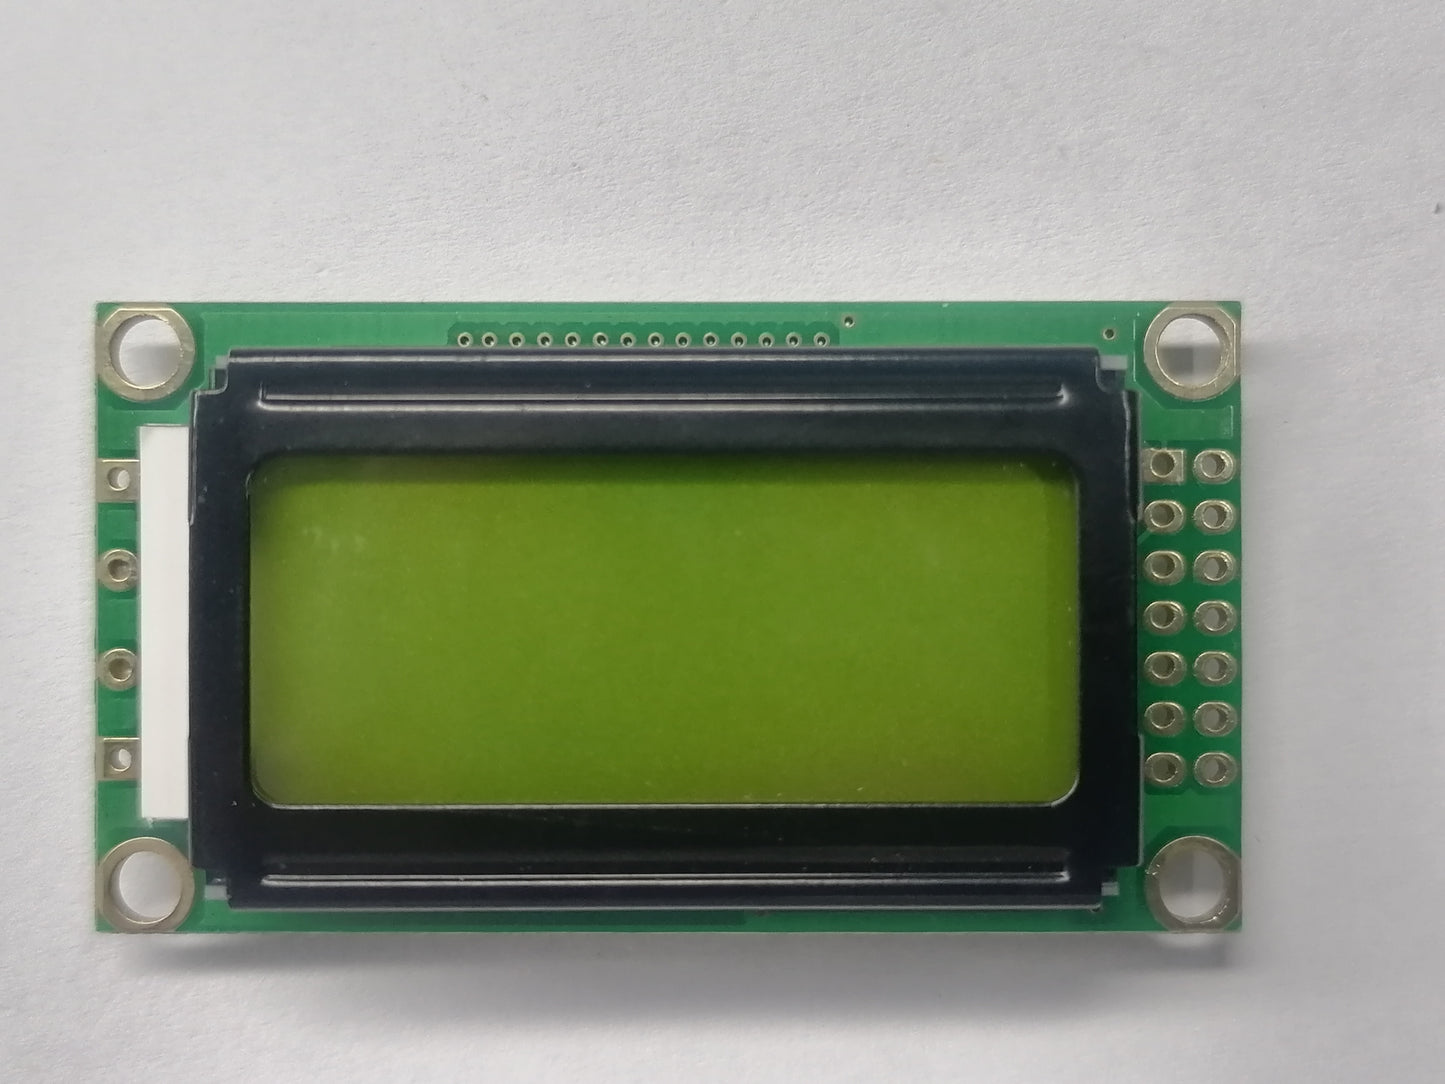 8x2 Character LCD Display Module (RD0802A)